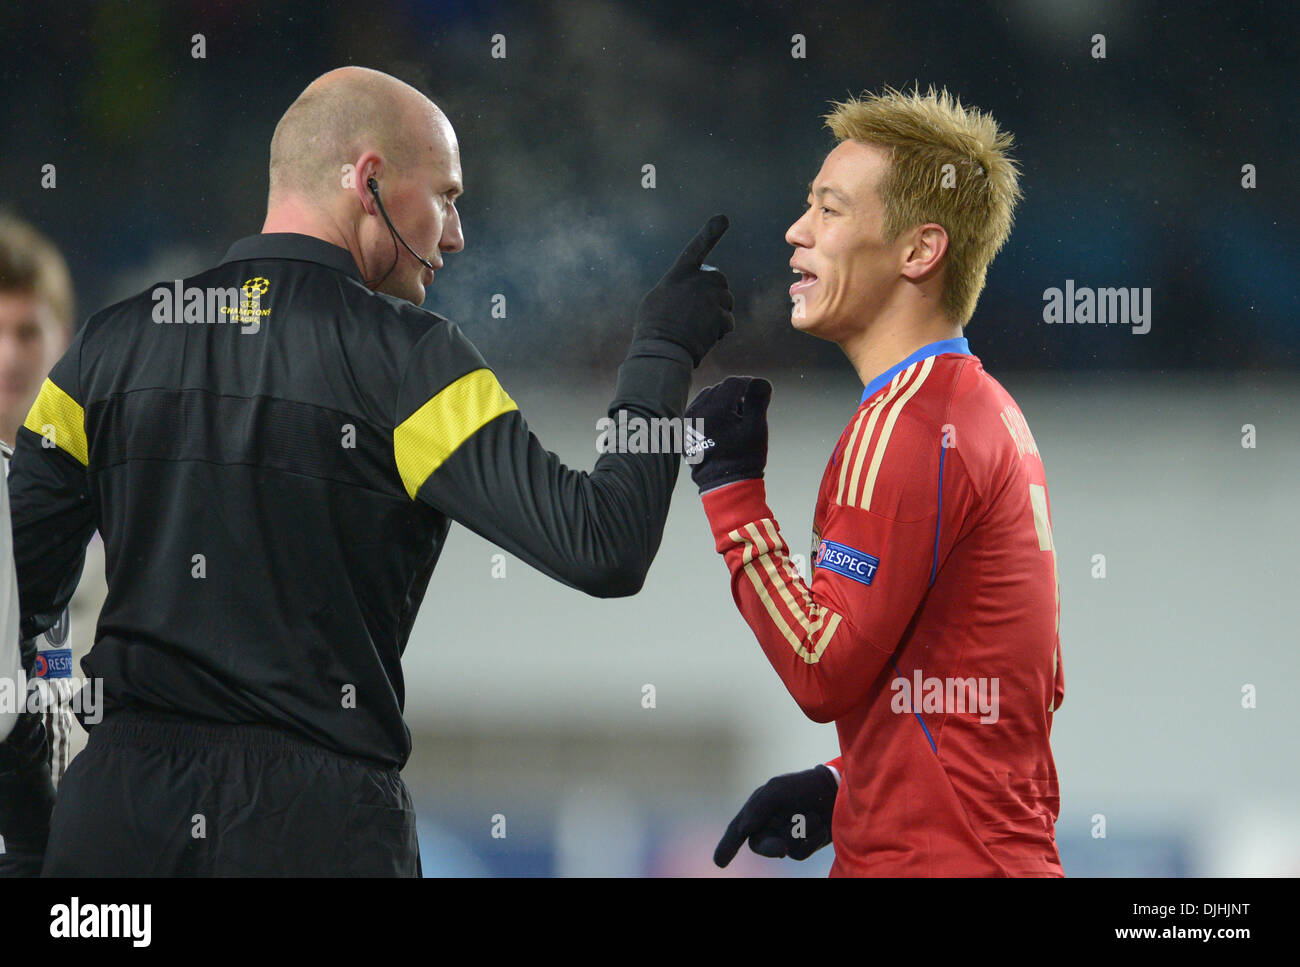 Moscow, Russia. 27th Nov, 2013. Referee Antony Gautier (L) talks to Moscow's Keisuke Honda during the UEFA Champions League Group D soccer match between CSKA Moscow and FC Bayern Munich at Arena Chimki in Moscow, Russia, 27 November 2013. Photo: Andreas Gebert/dpa/Alamy Live News Stock Photo